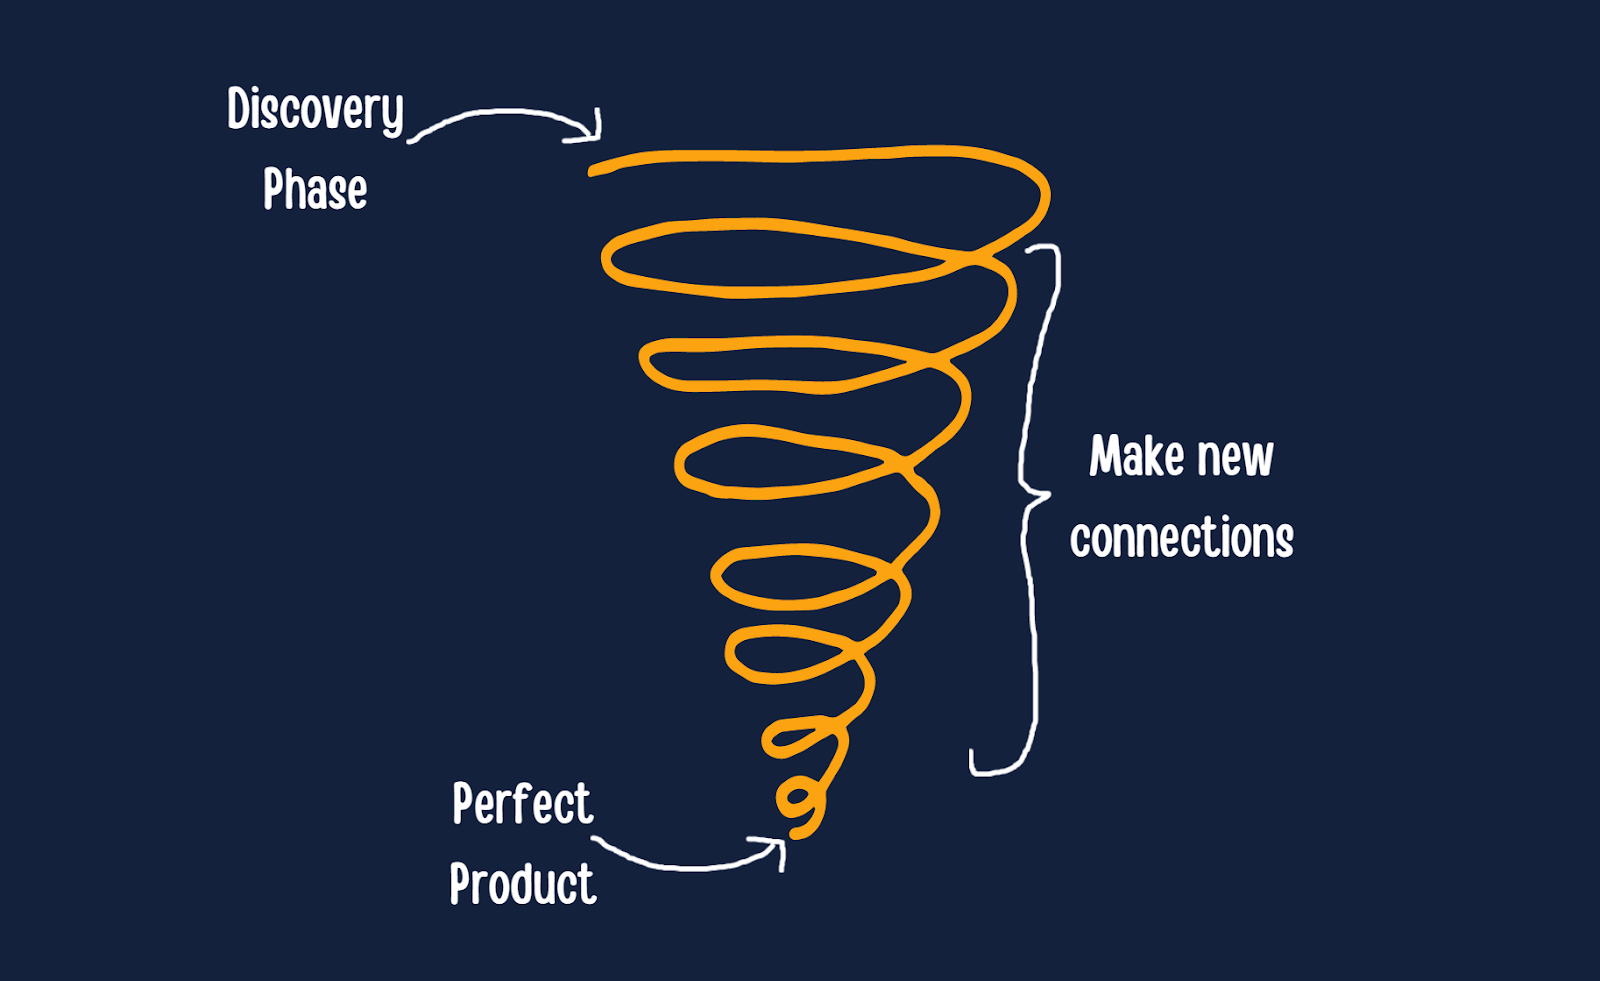 The User Experience (UX) Research Learning Spiral showing discovery phase, leading up to the perfect product. 